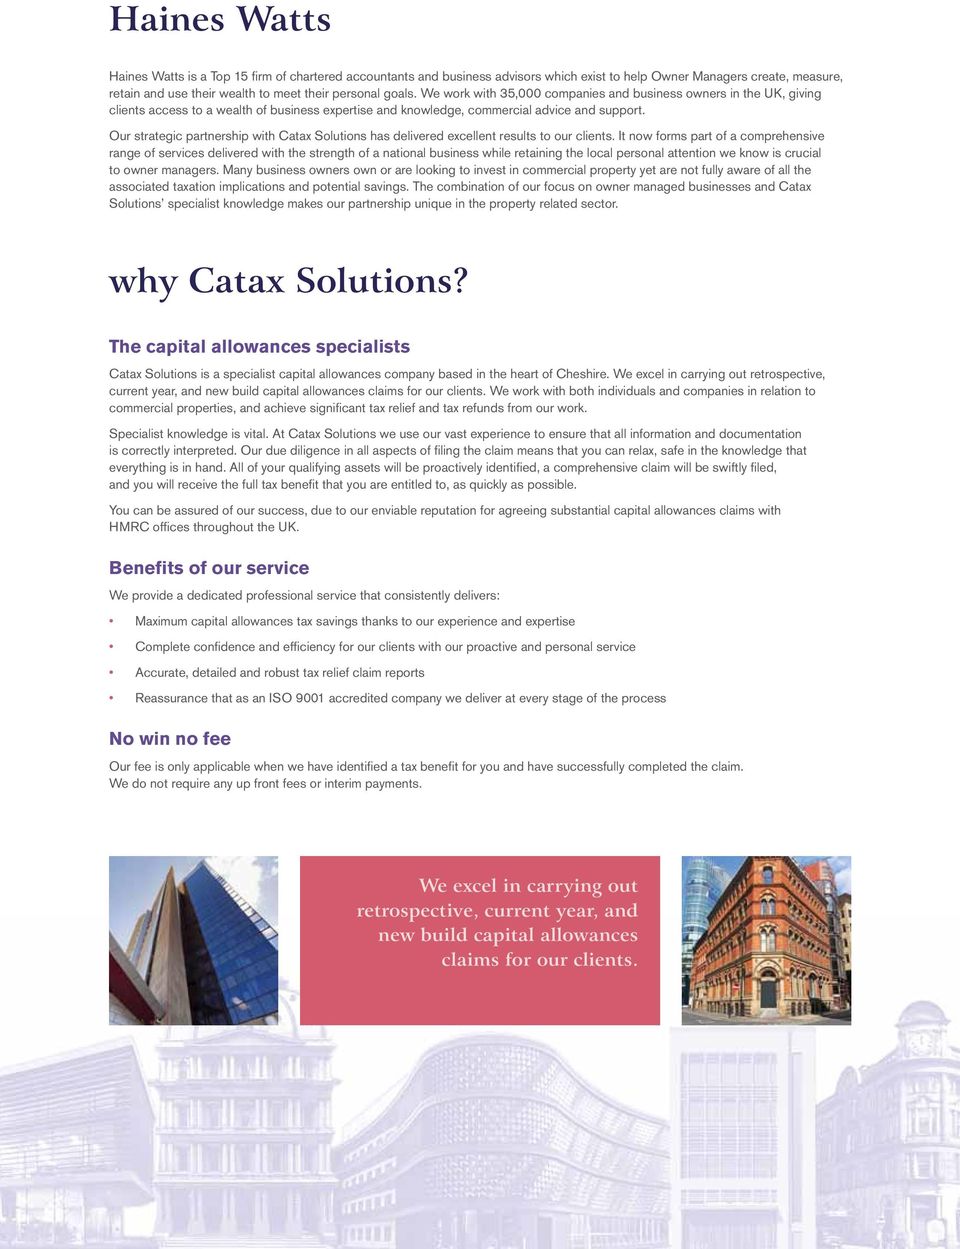 Our strategic partnership with Catax Solutions has delivered excellent results to our clients.